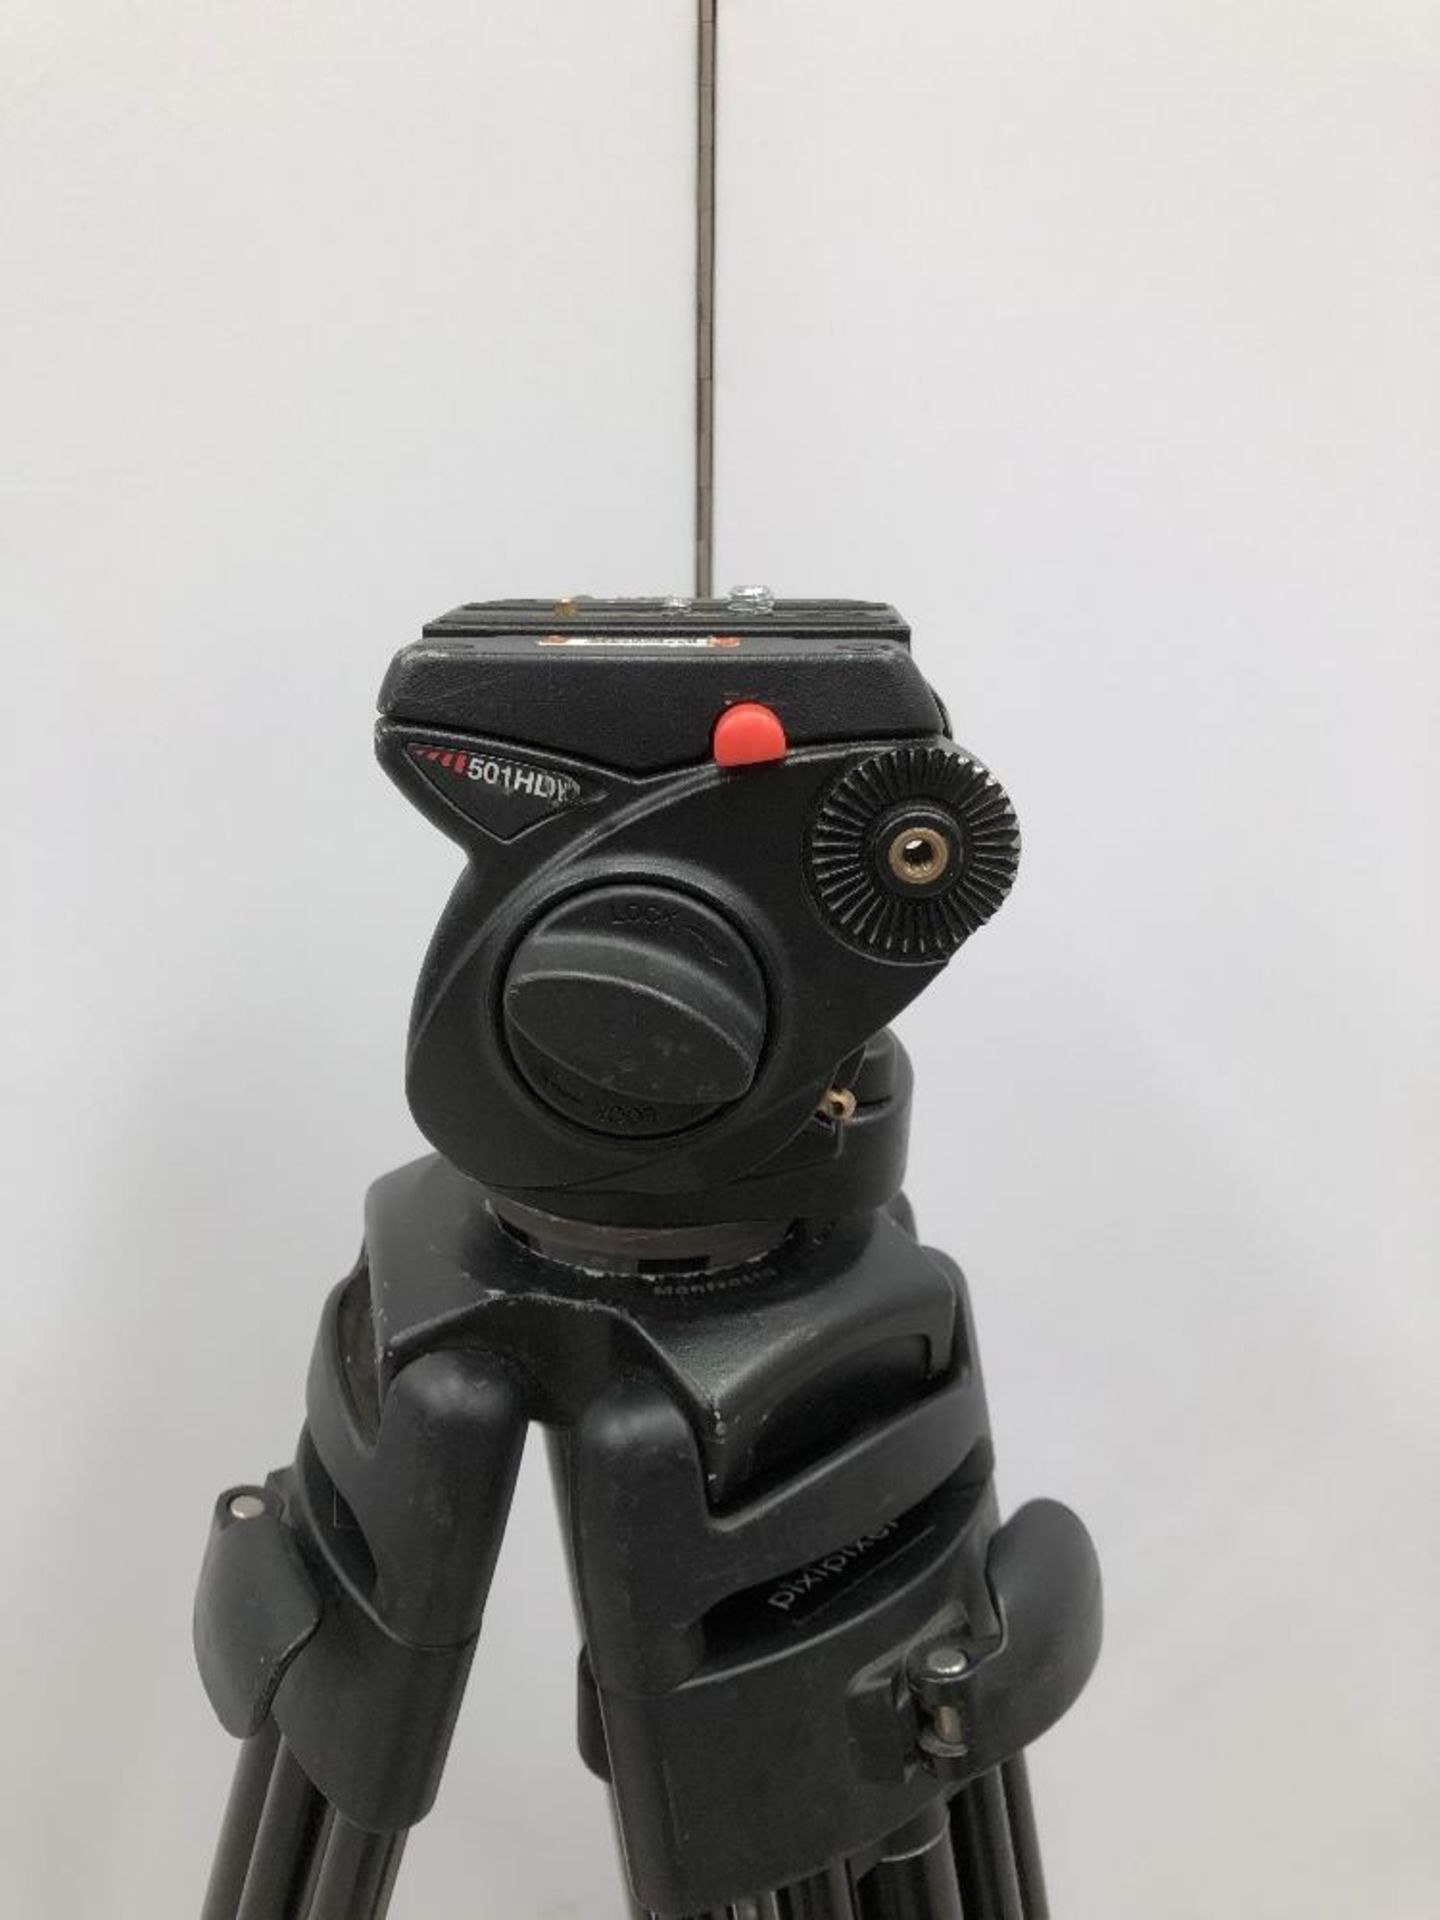 Manfrotto PT525 525V/MK29 Protouch Camera Tripod With Manfrotto 501HD Fluid Head - Image 5 of 6